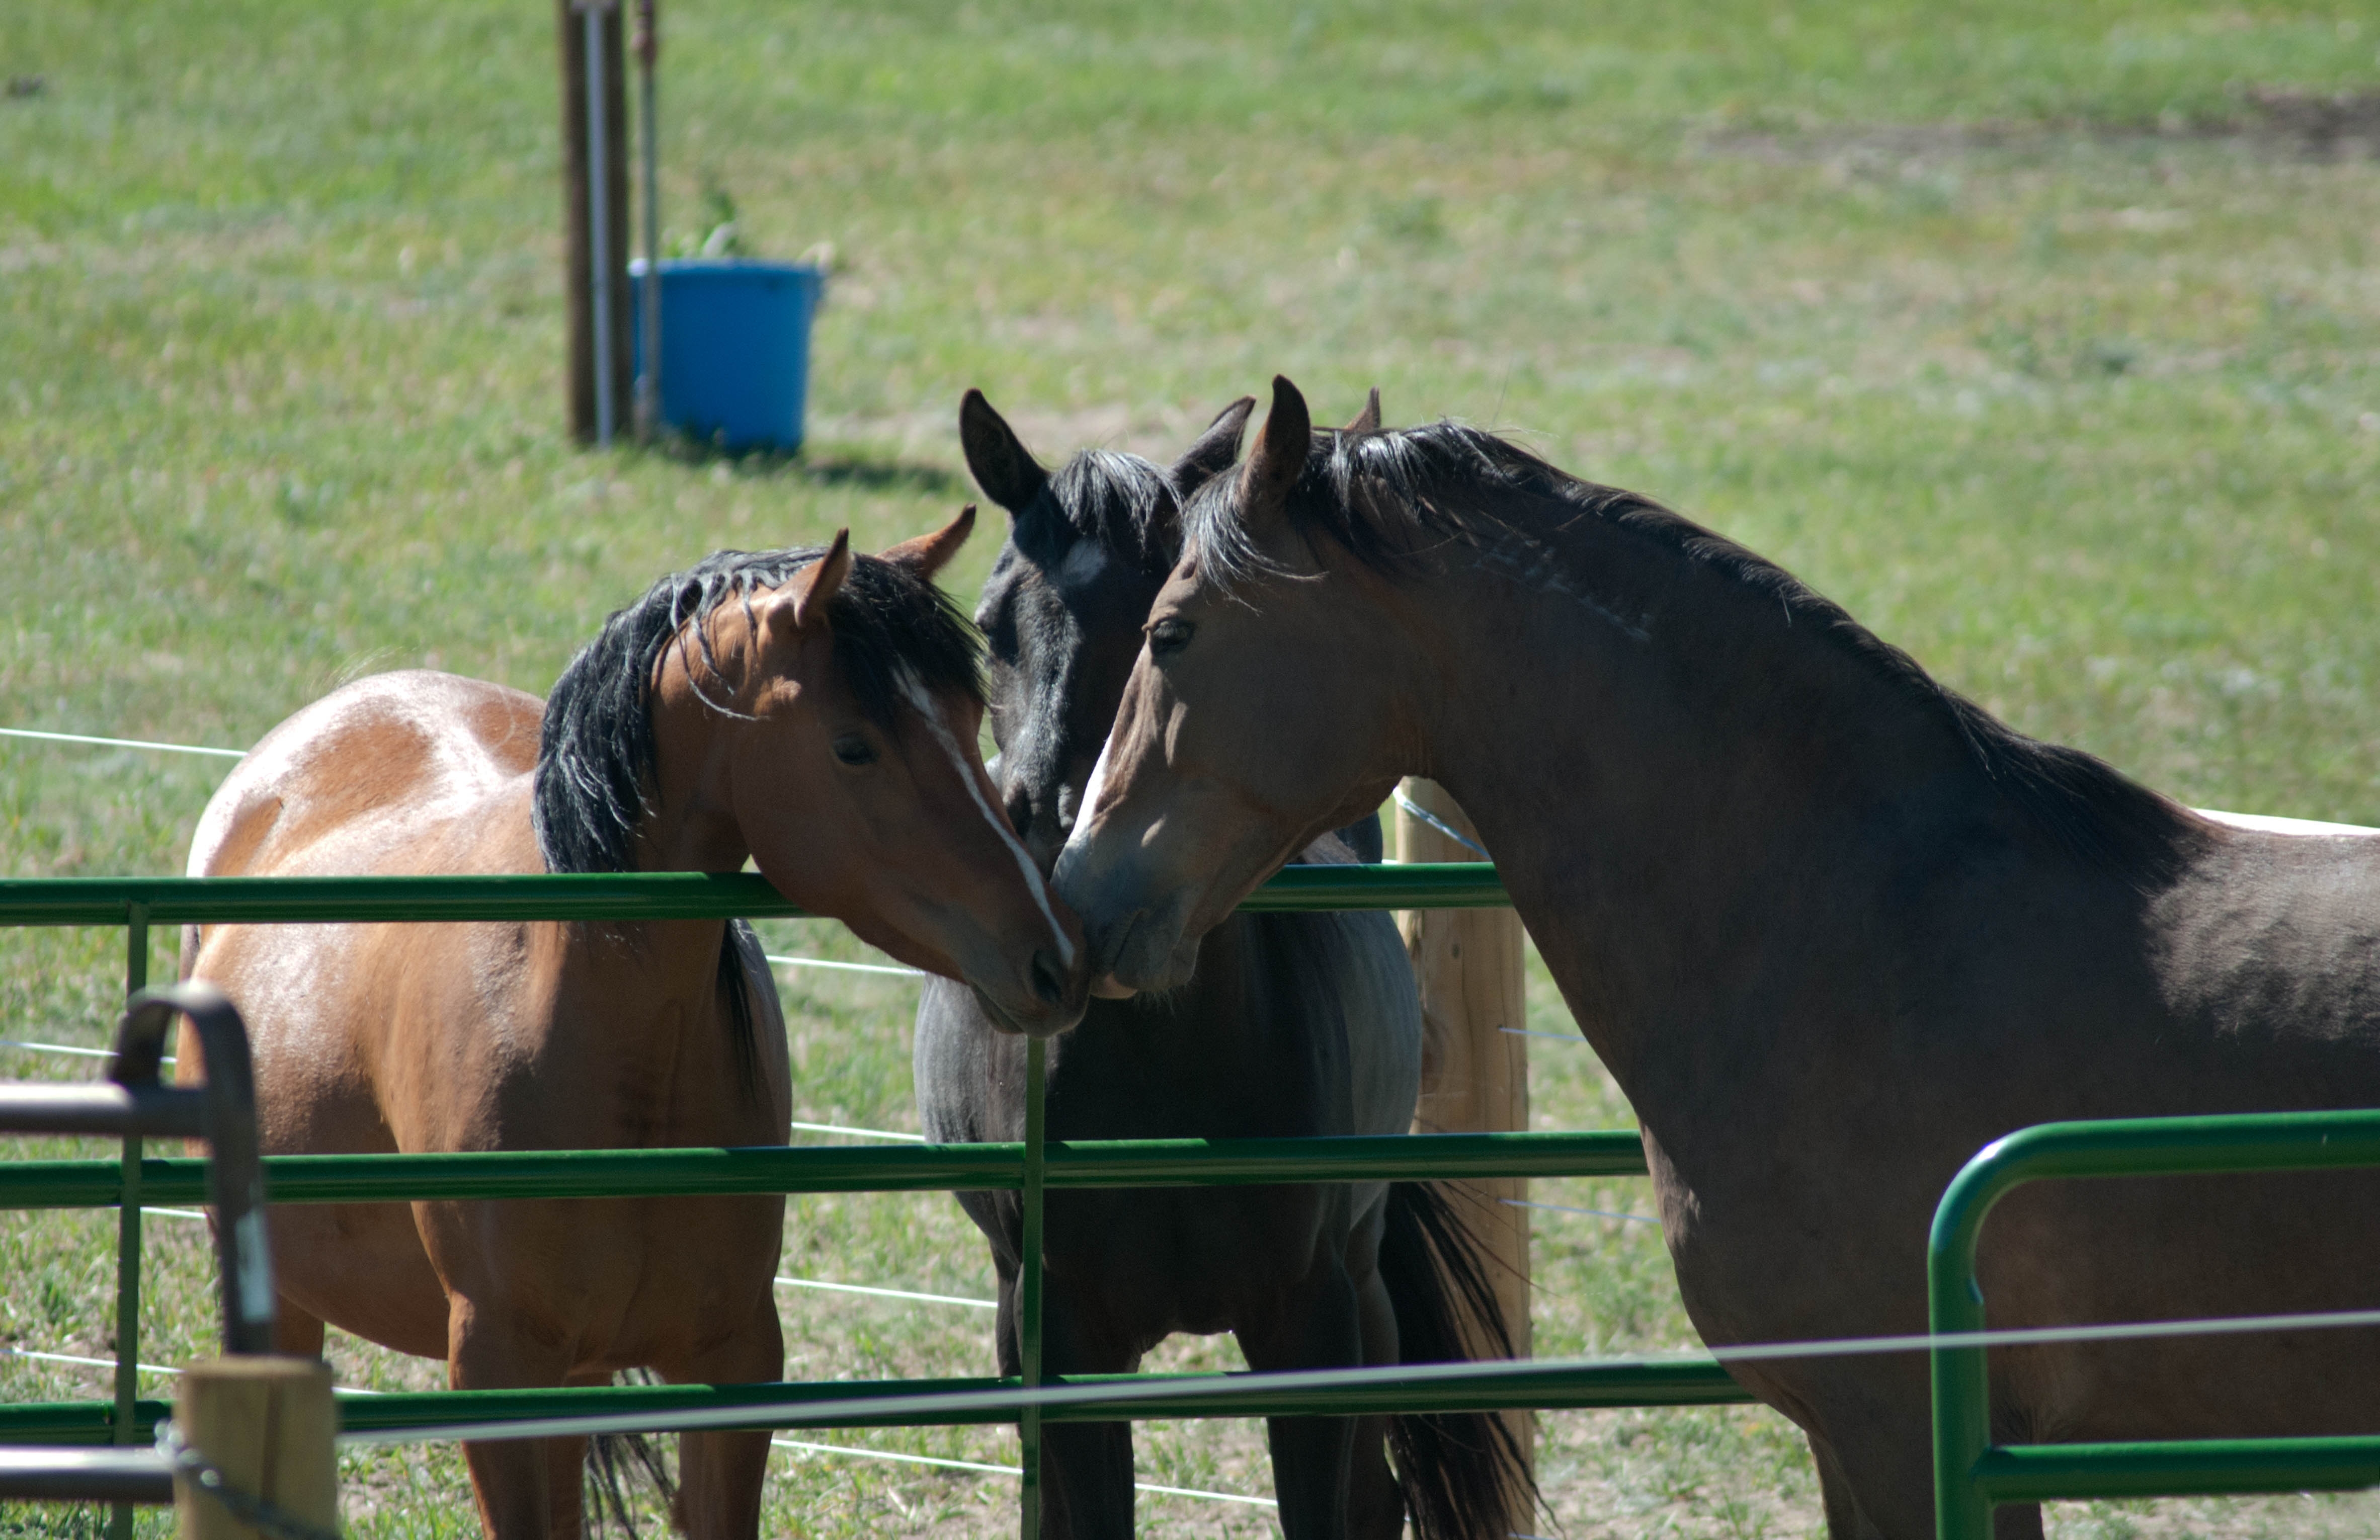 A huge victory after our three years of legal efforts to stop horse slaughter in New Mexico